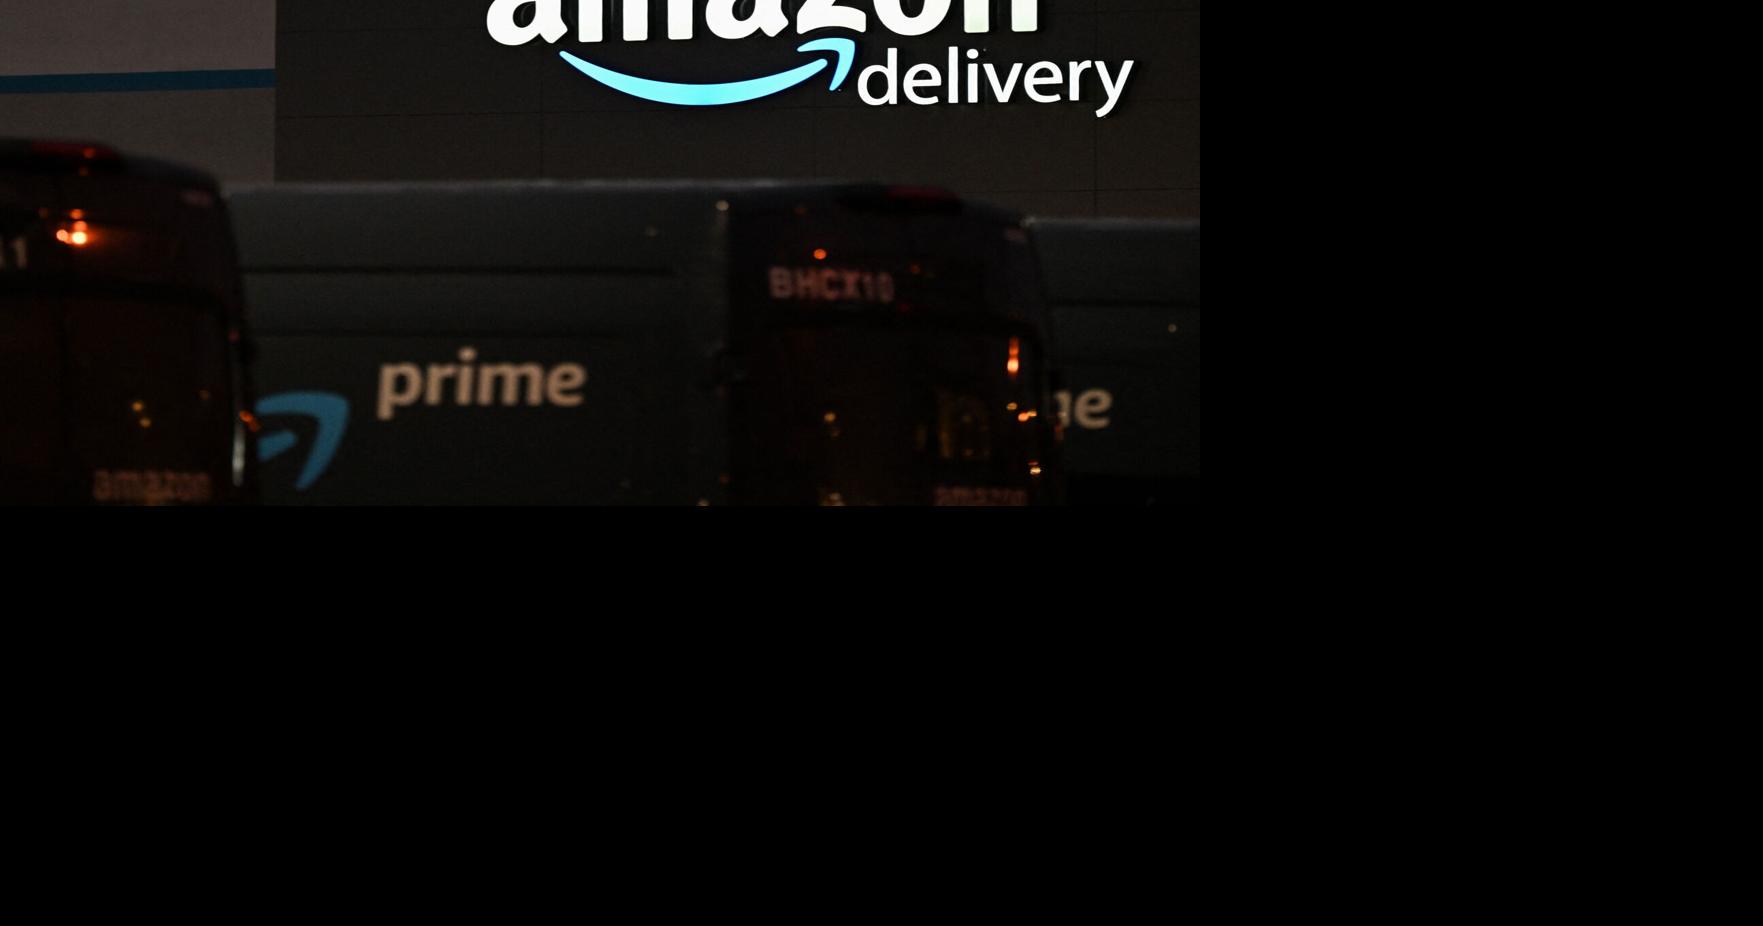 says Prime deliveries reached their fastest speeds ever last year